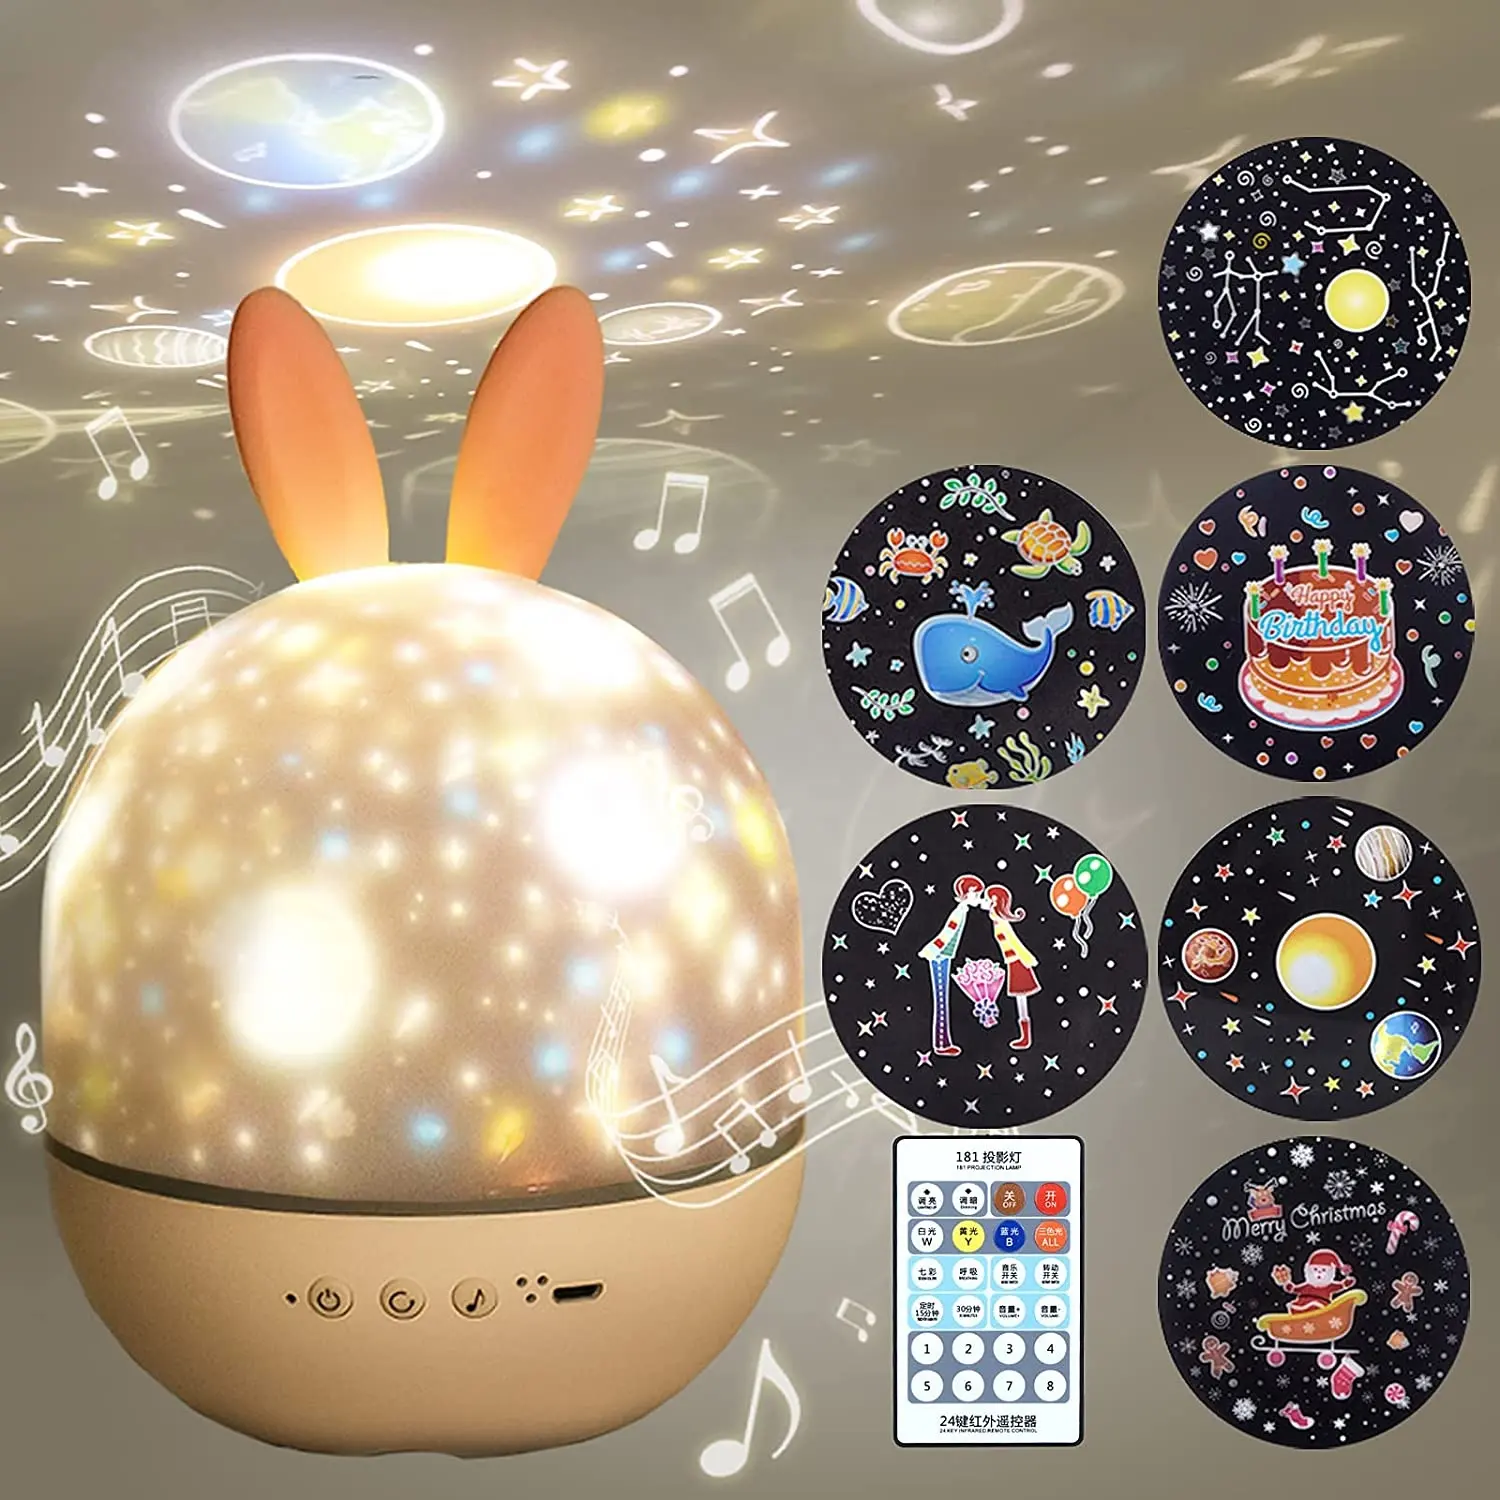 Colorlife Popular Rabbit Shaped Baby Gift Set Starry Star Projector Night Light Music Box Mini Led Table Lamp for Kids